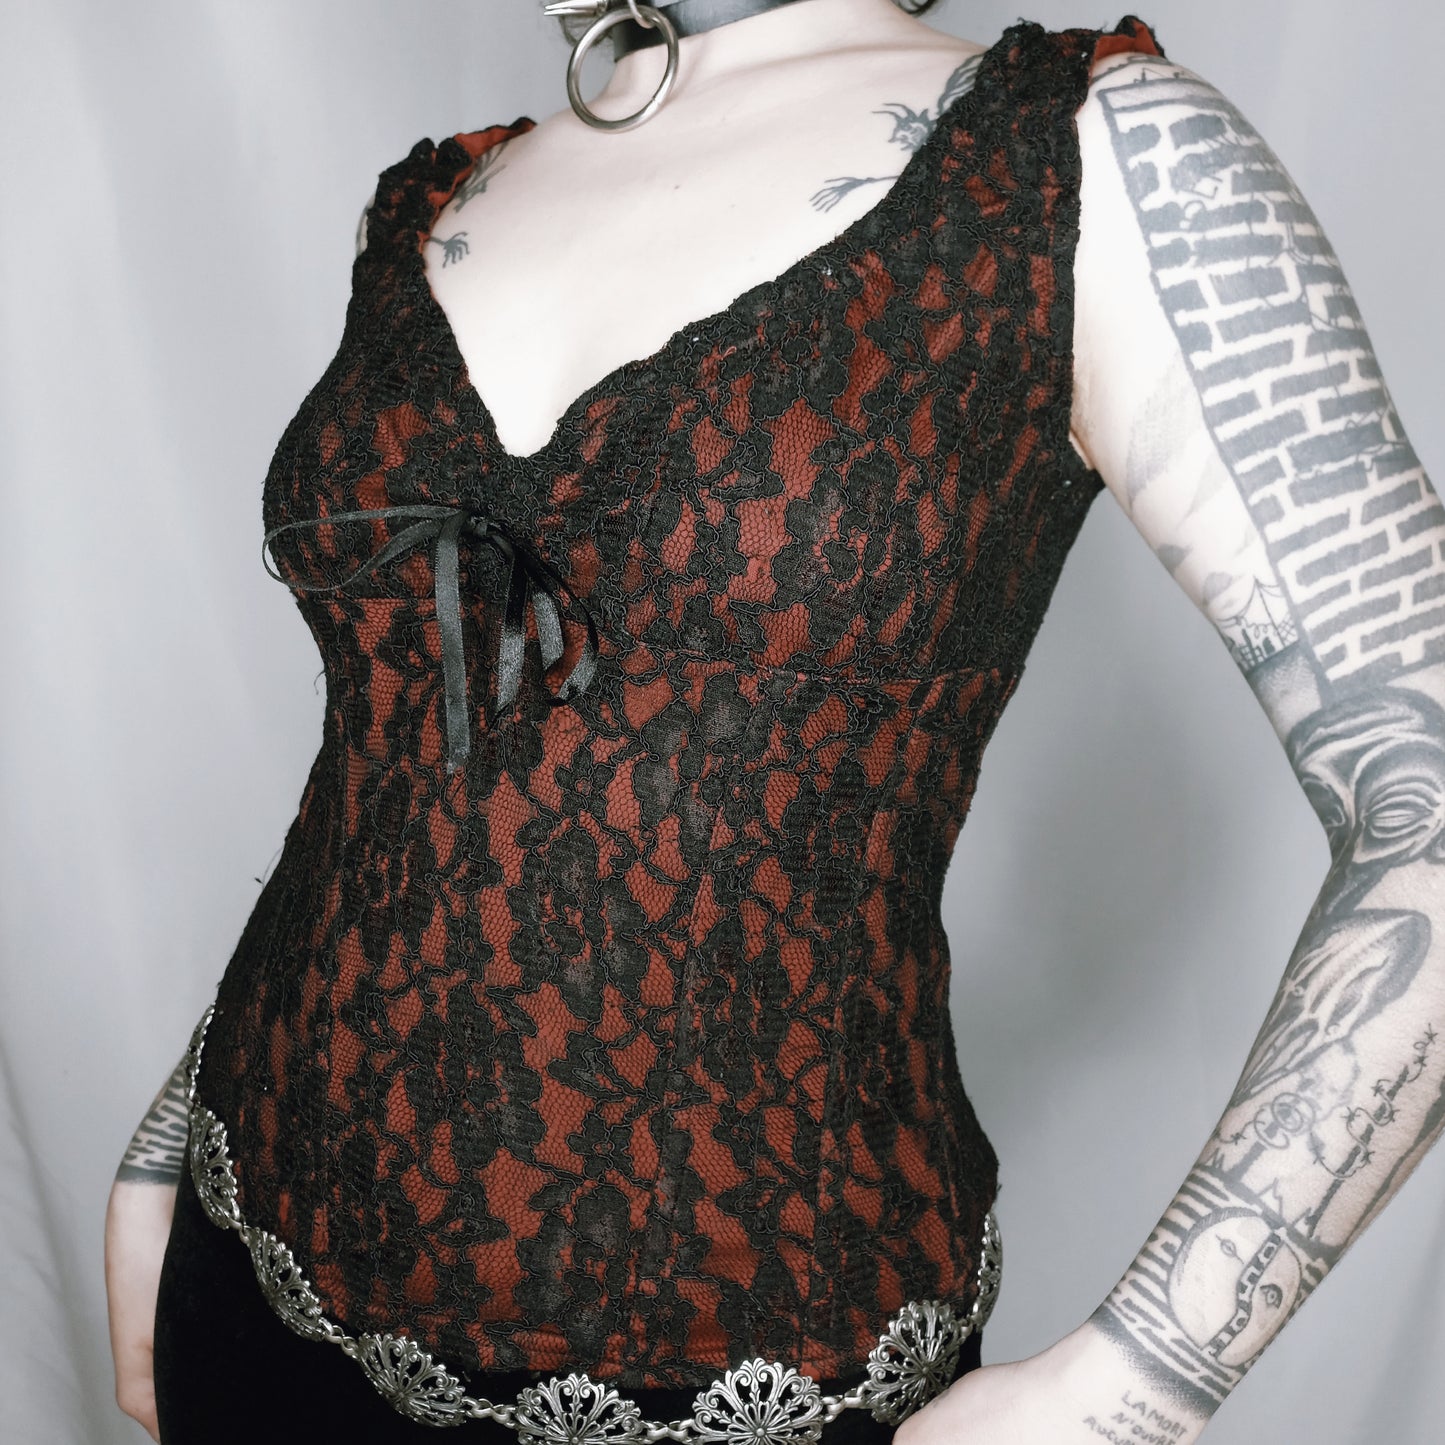 Red & Black Lace Corset Top - M